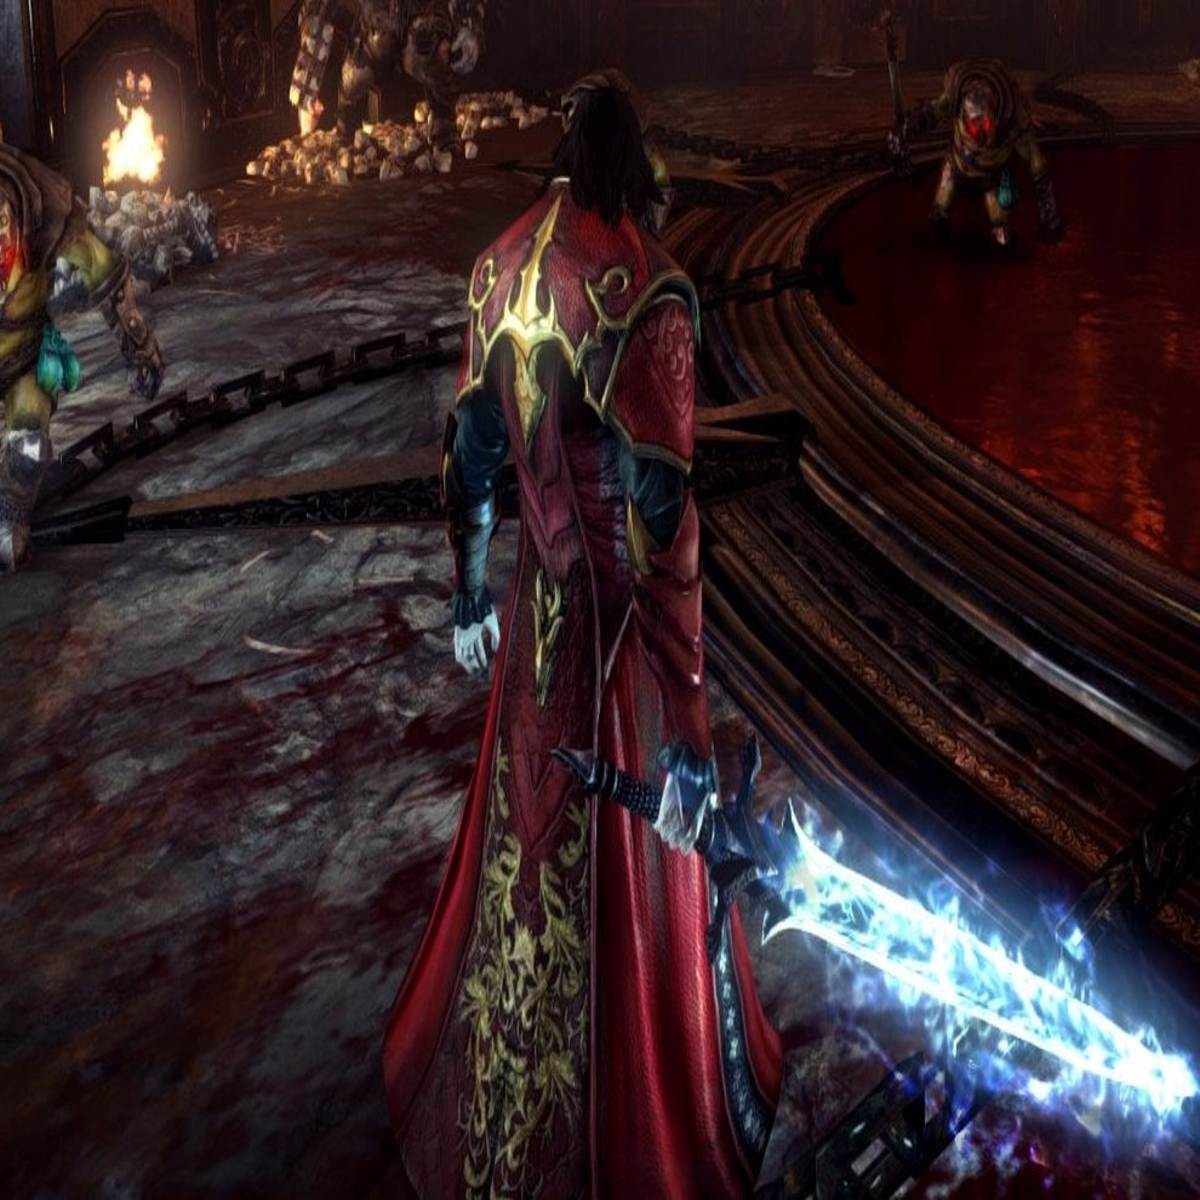 Castlevania: Lords of Shadow 2 is all about Dracula, allowing